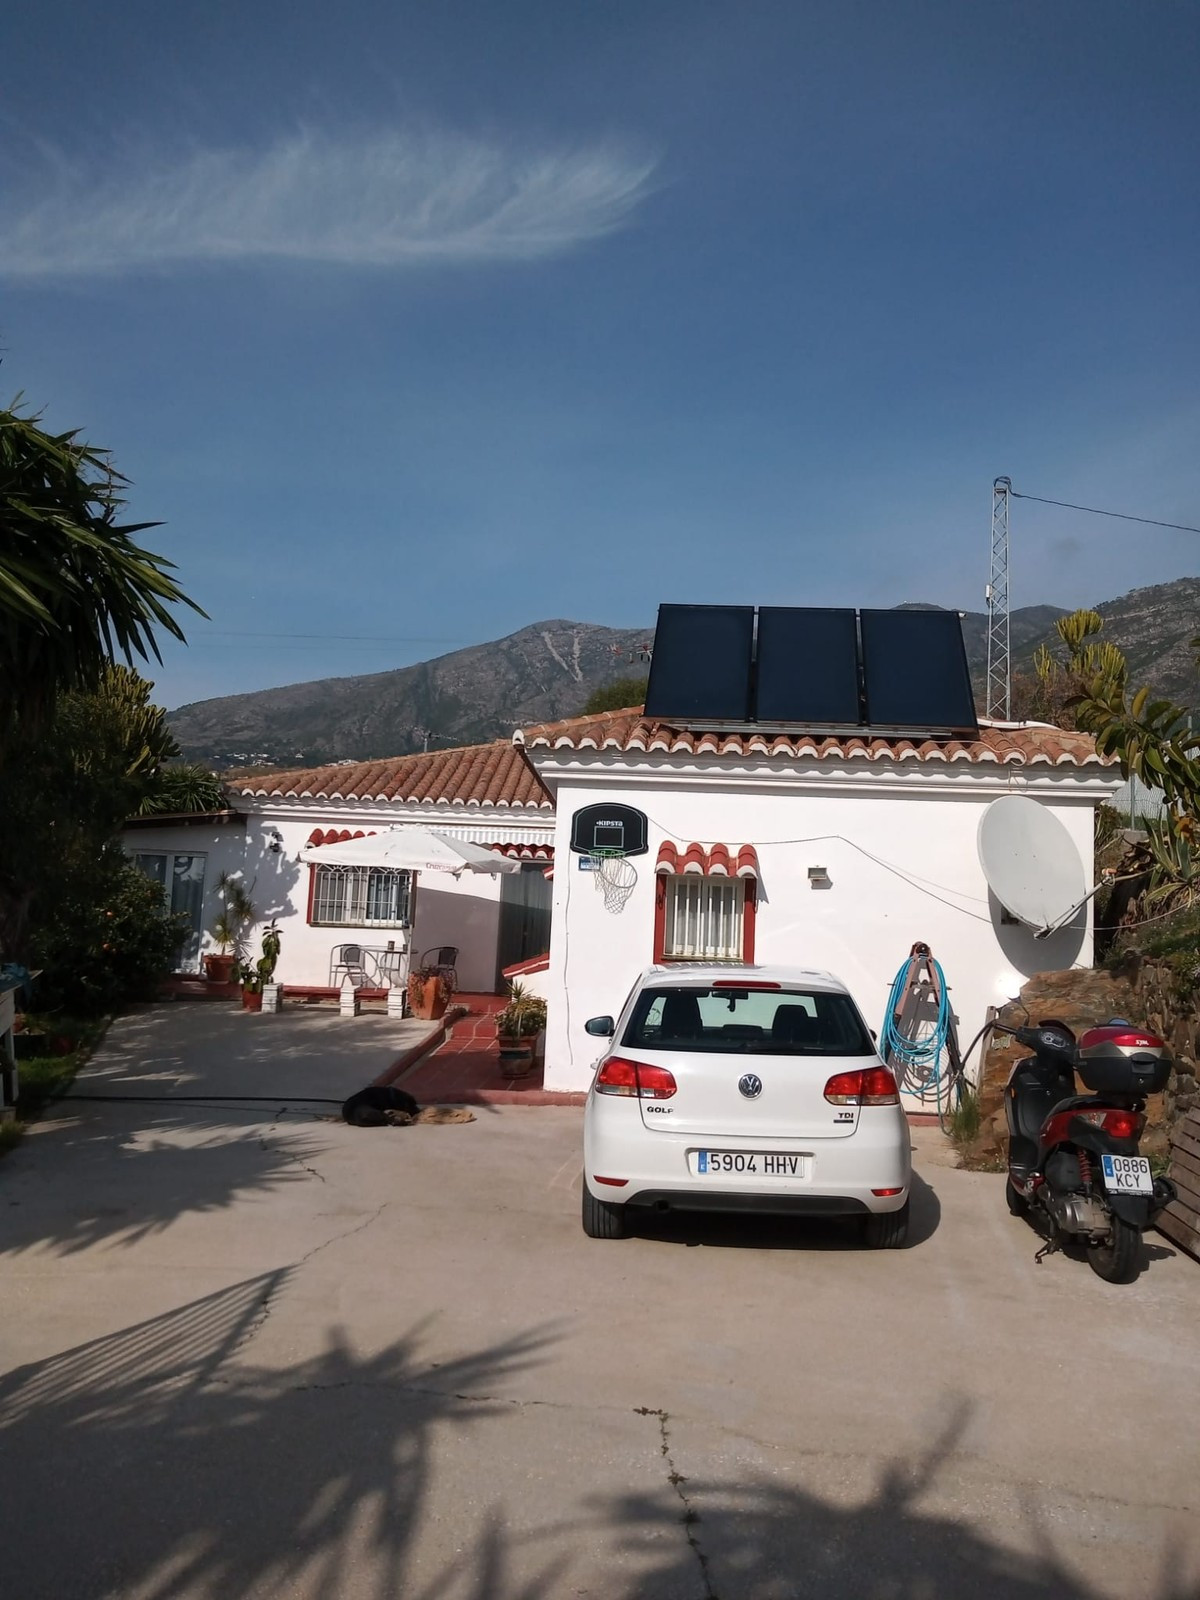 Qlistings Countryside House in Mijas, Costa del Sol main image